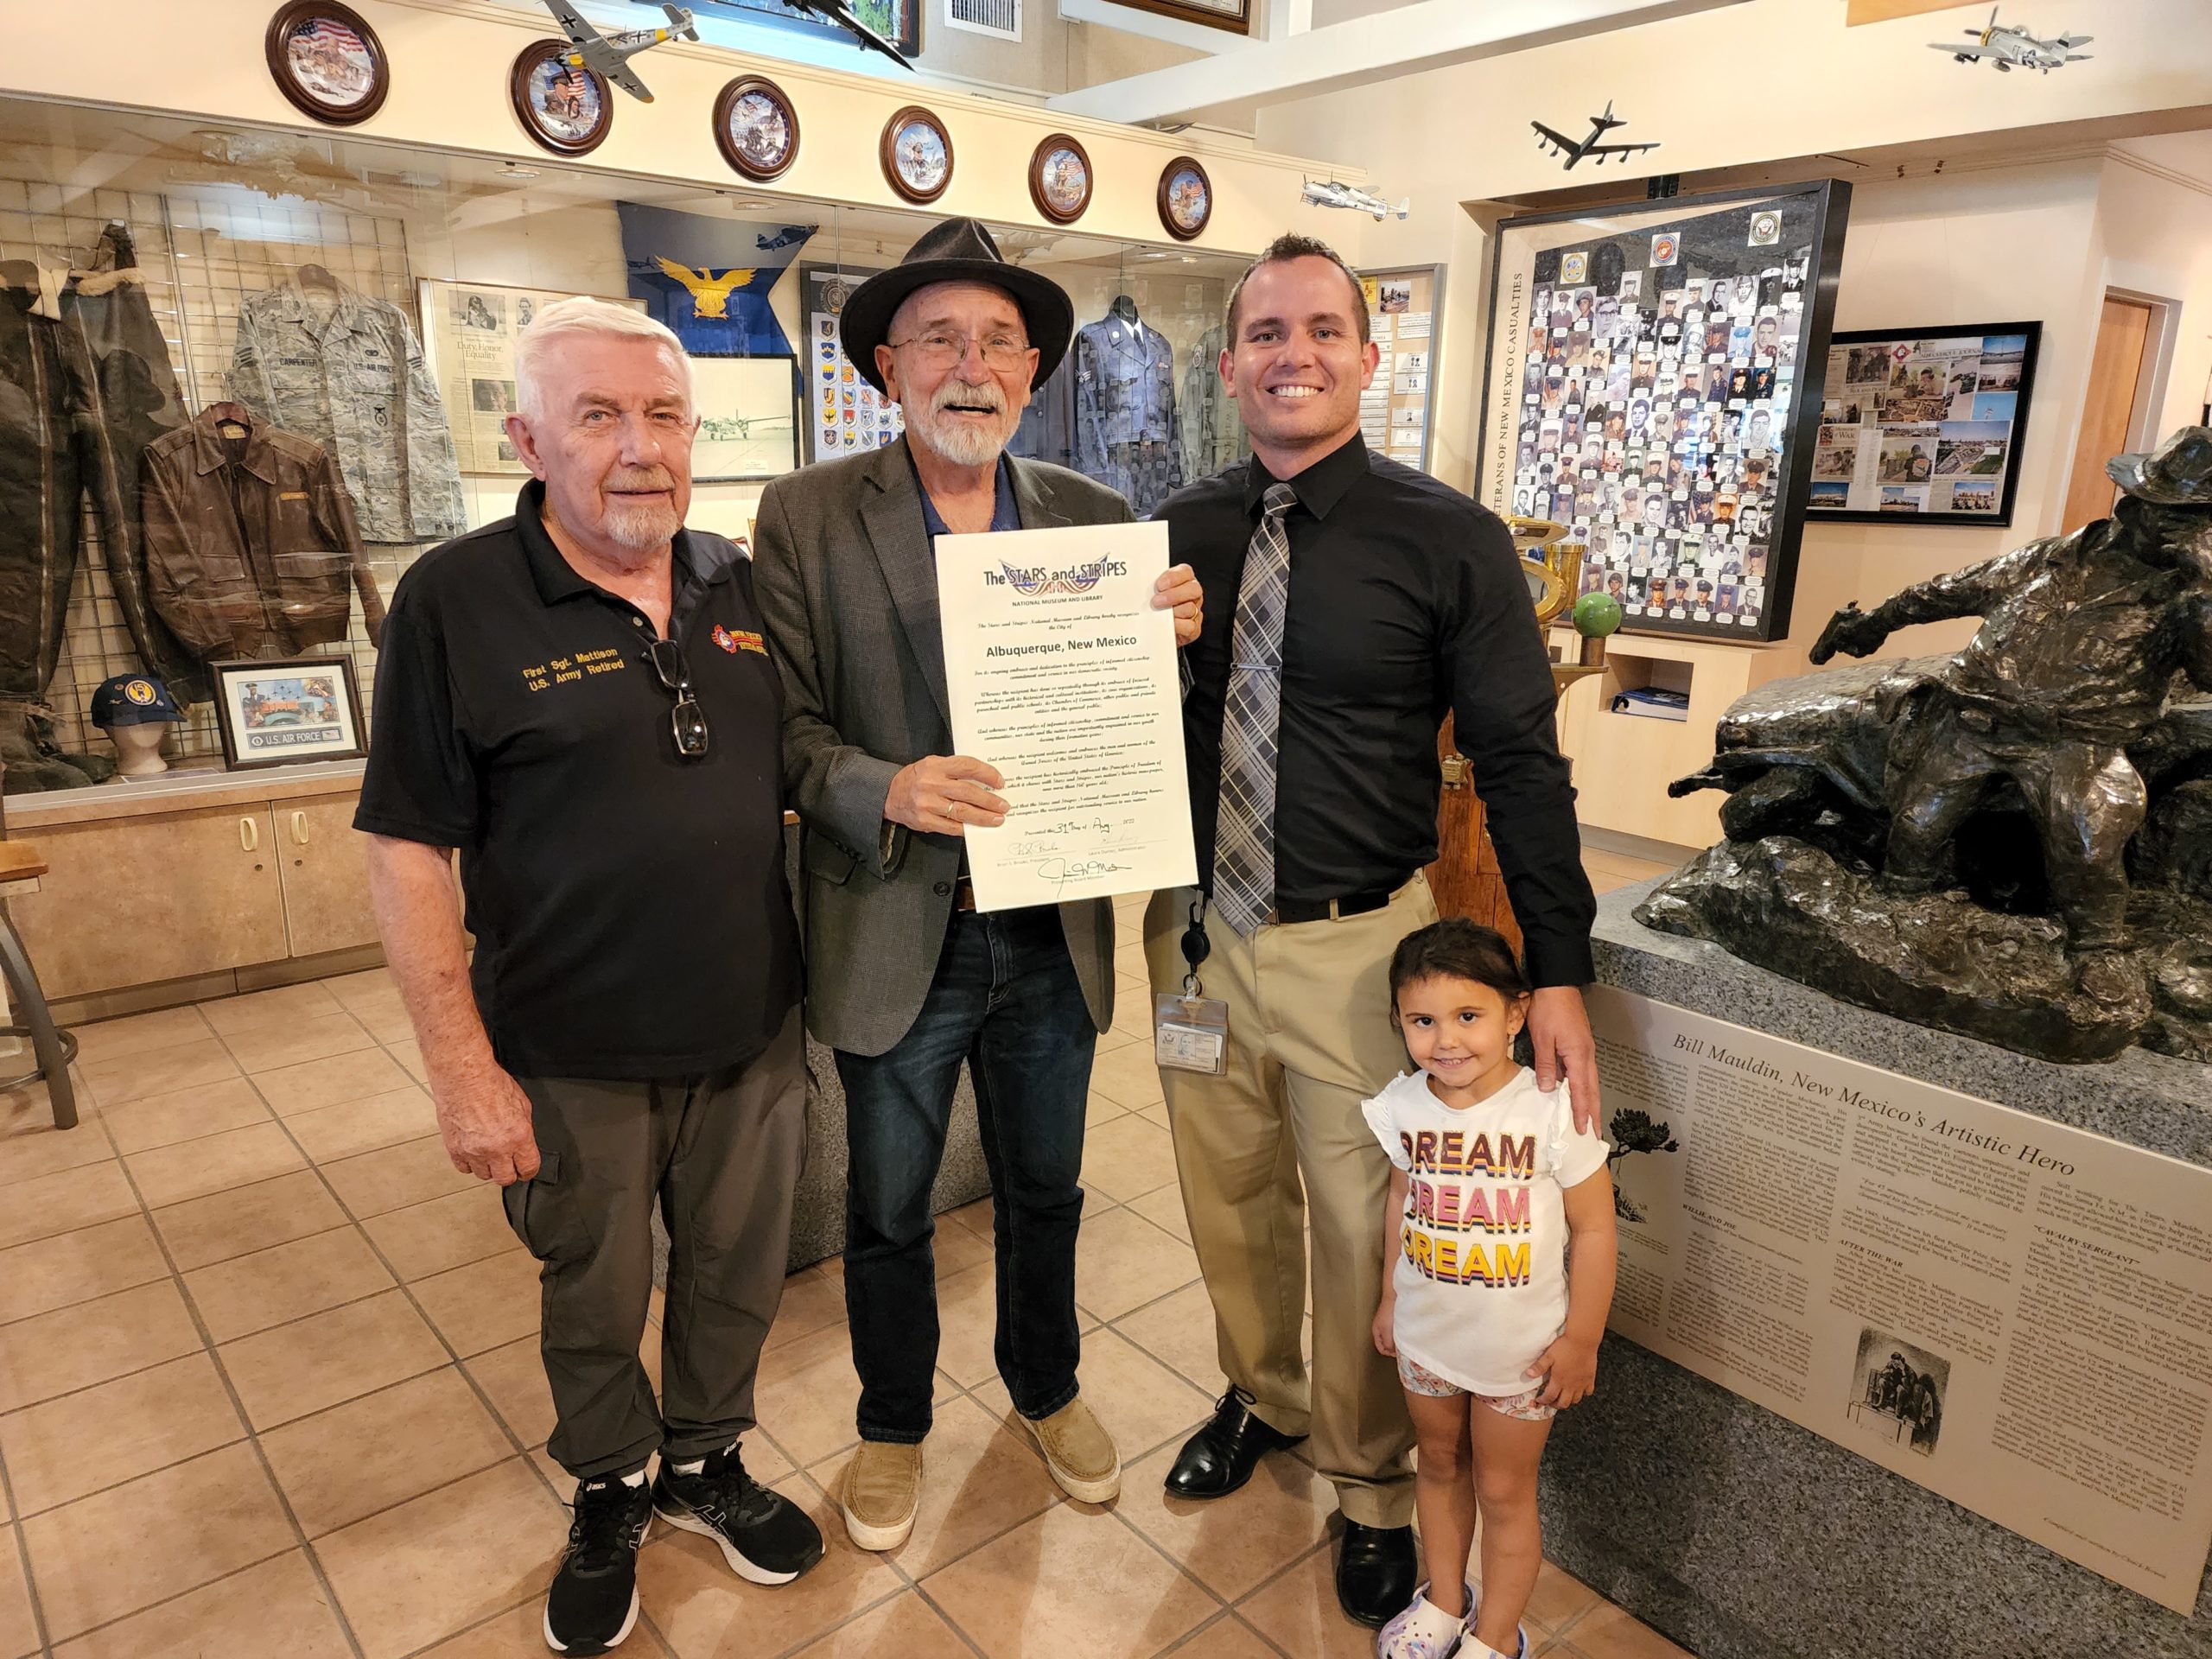 On Wednesday, August 31, 2022, Jim Martin presented the Stars and Stripes City Proclamation to Albuquerque, New Mexico which was accepted by Robert "Top" Mattison, Vice President of the New Mexico Veterans Memorial Board of Directors; Thomas Tozier, Albuquerque Mayor Tim Keller's Liaison and Coordinator for Veterans Affairs; and his 3-year-old daughter.